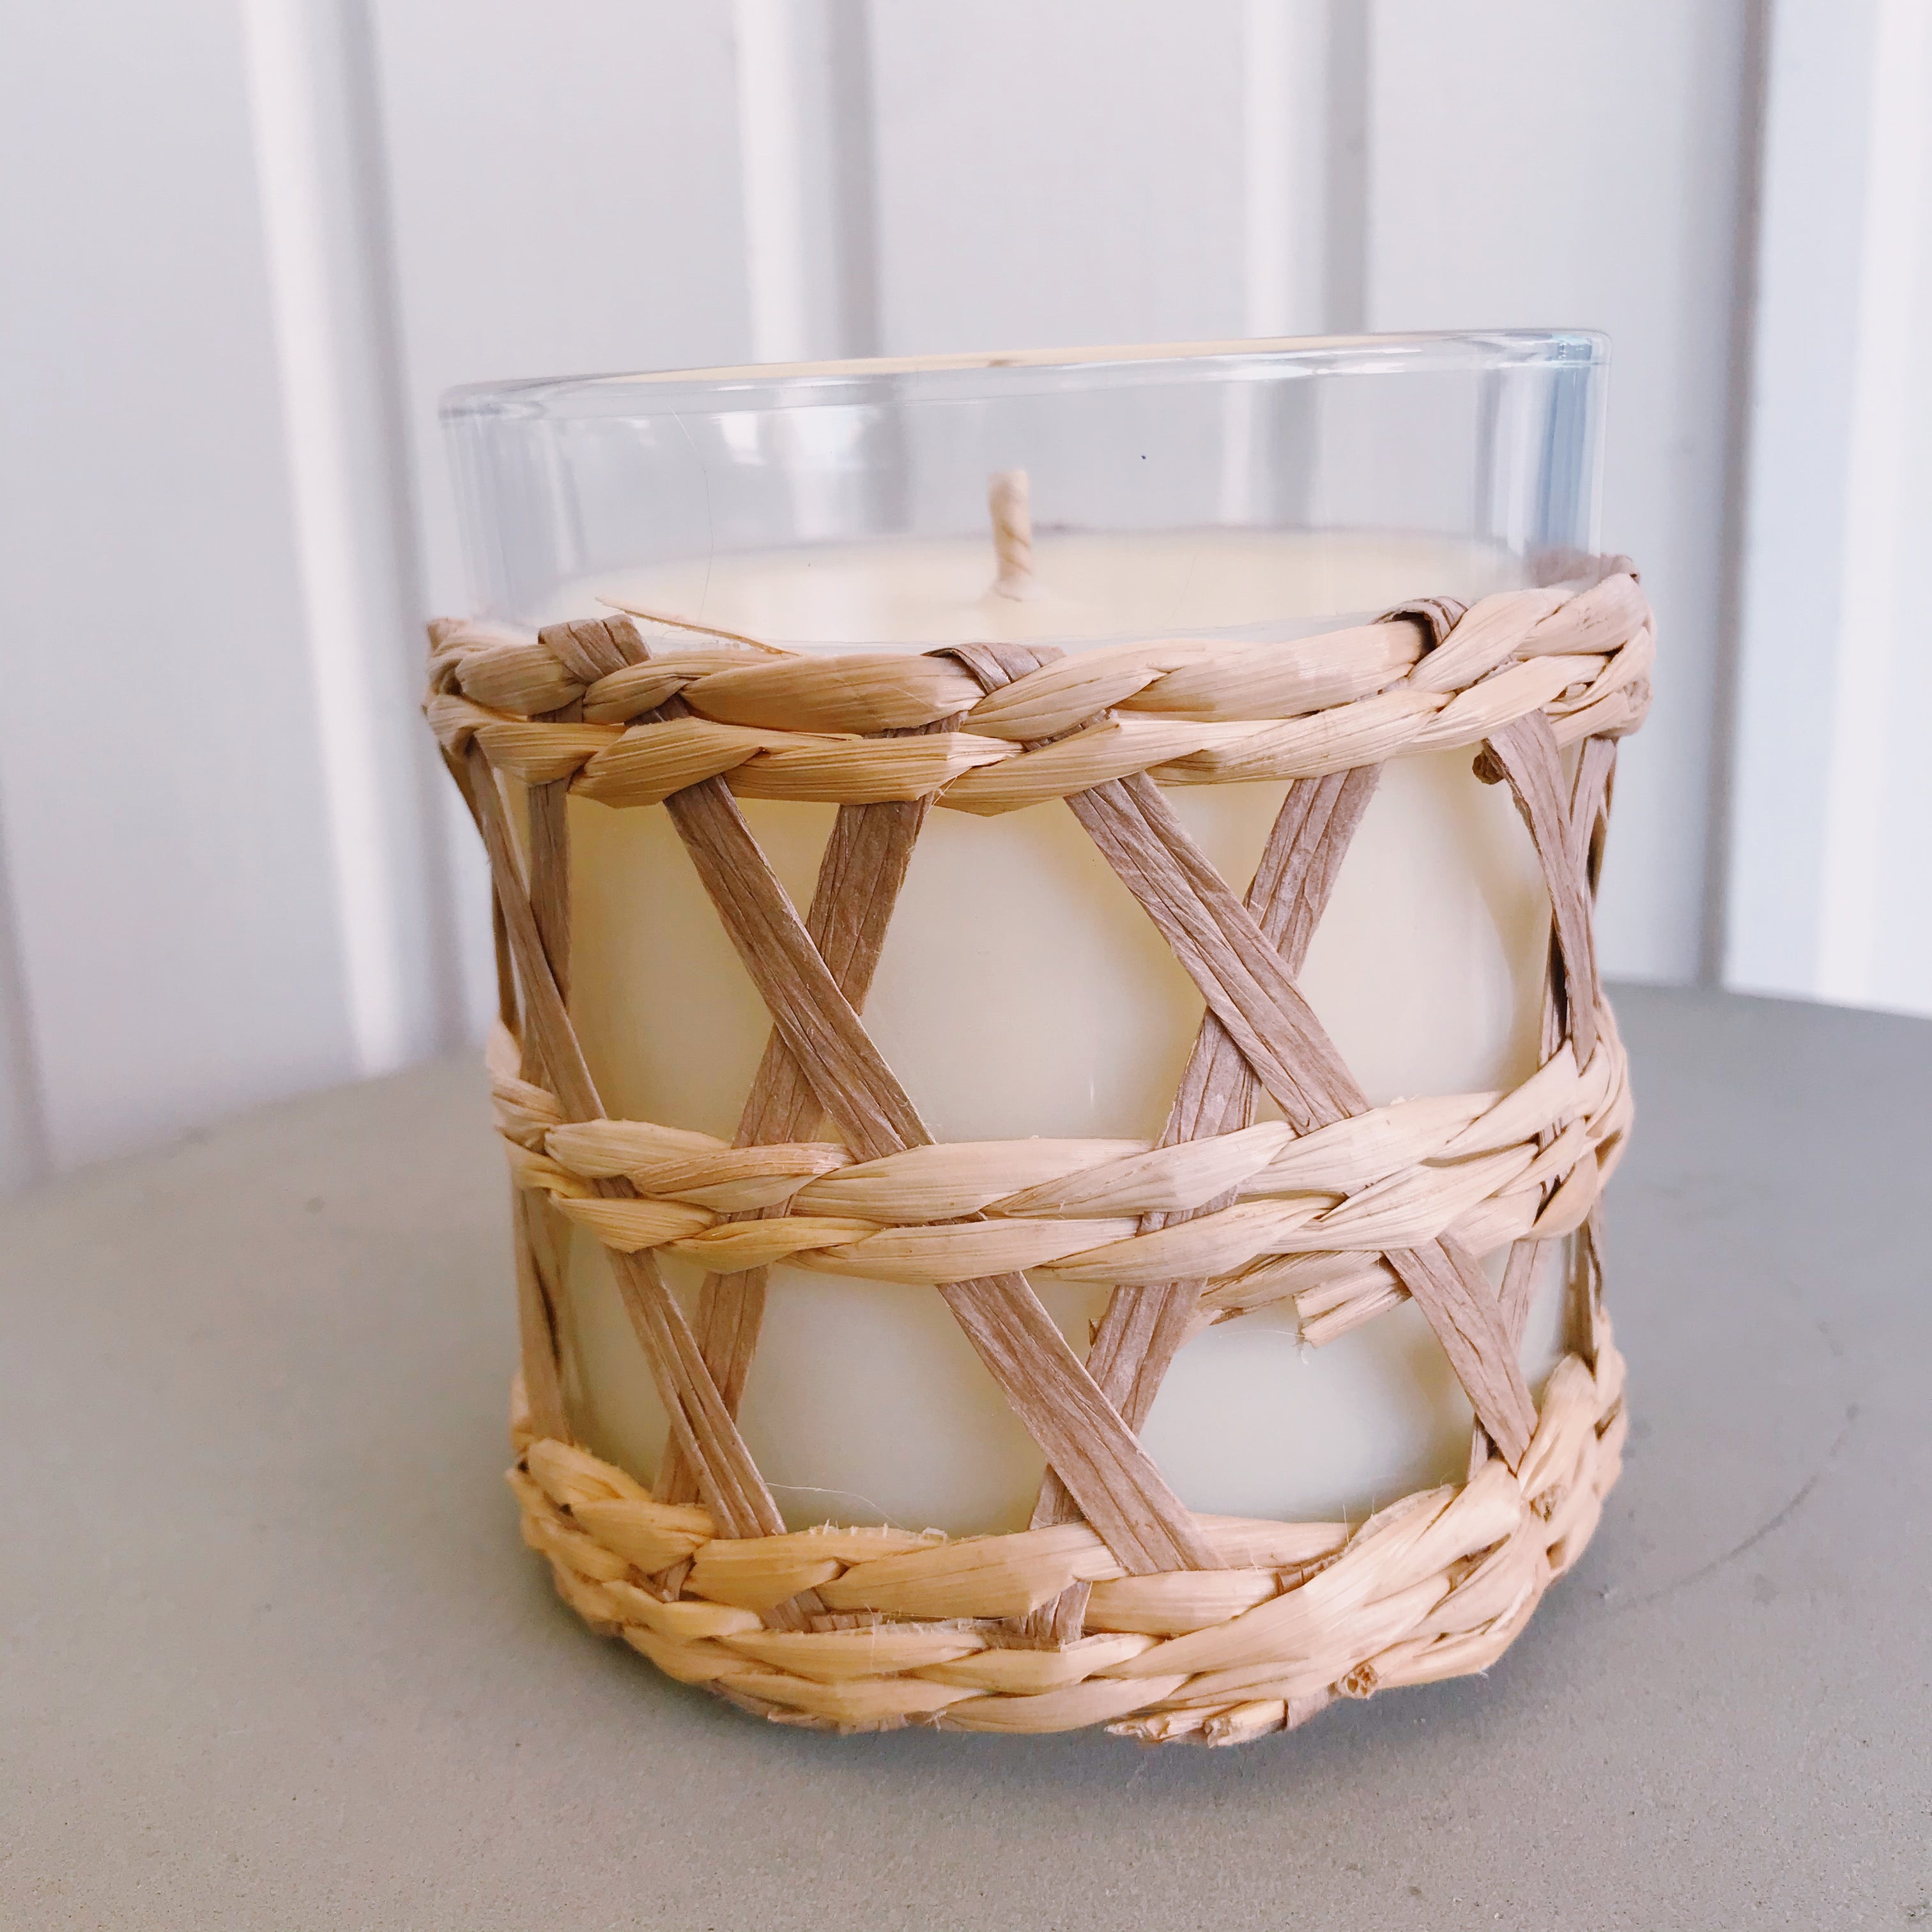 Local Handmade Natural Soy Wax & Coconut Oil Candle - Woven Straw Candle 40hrs